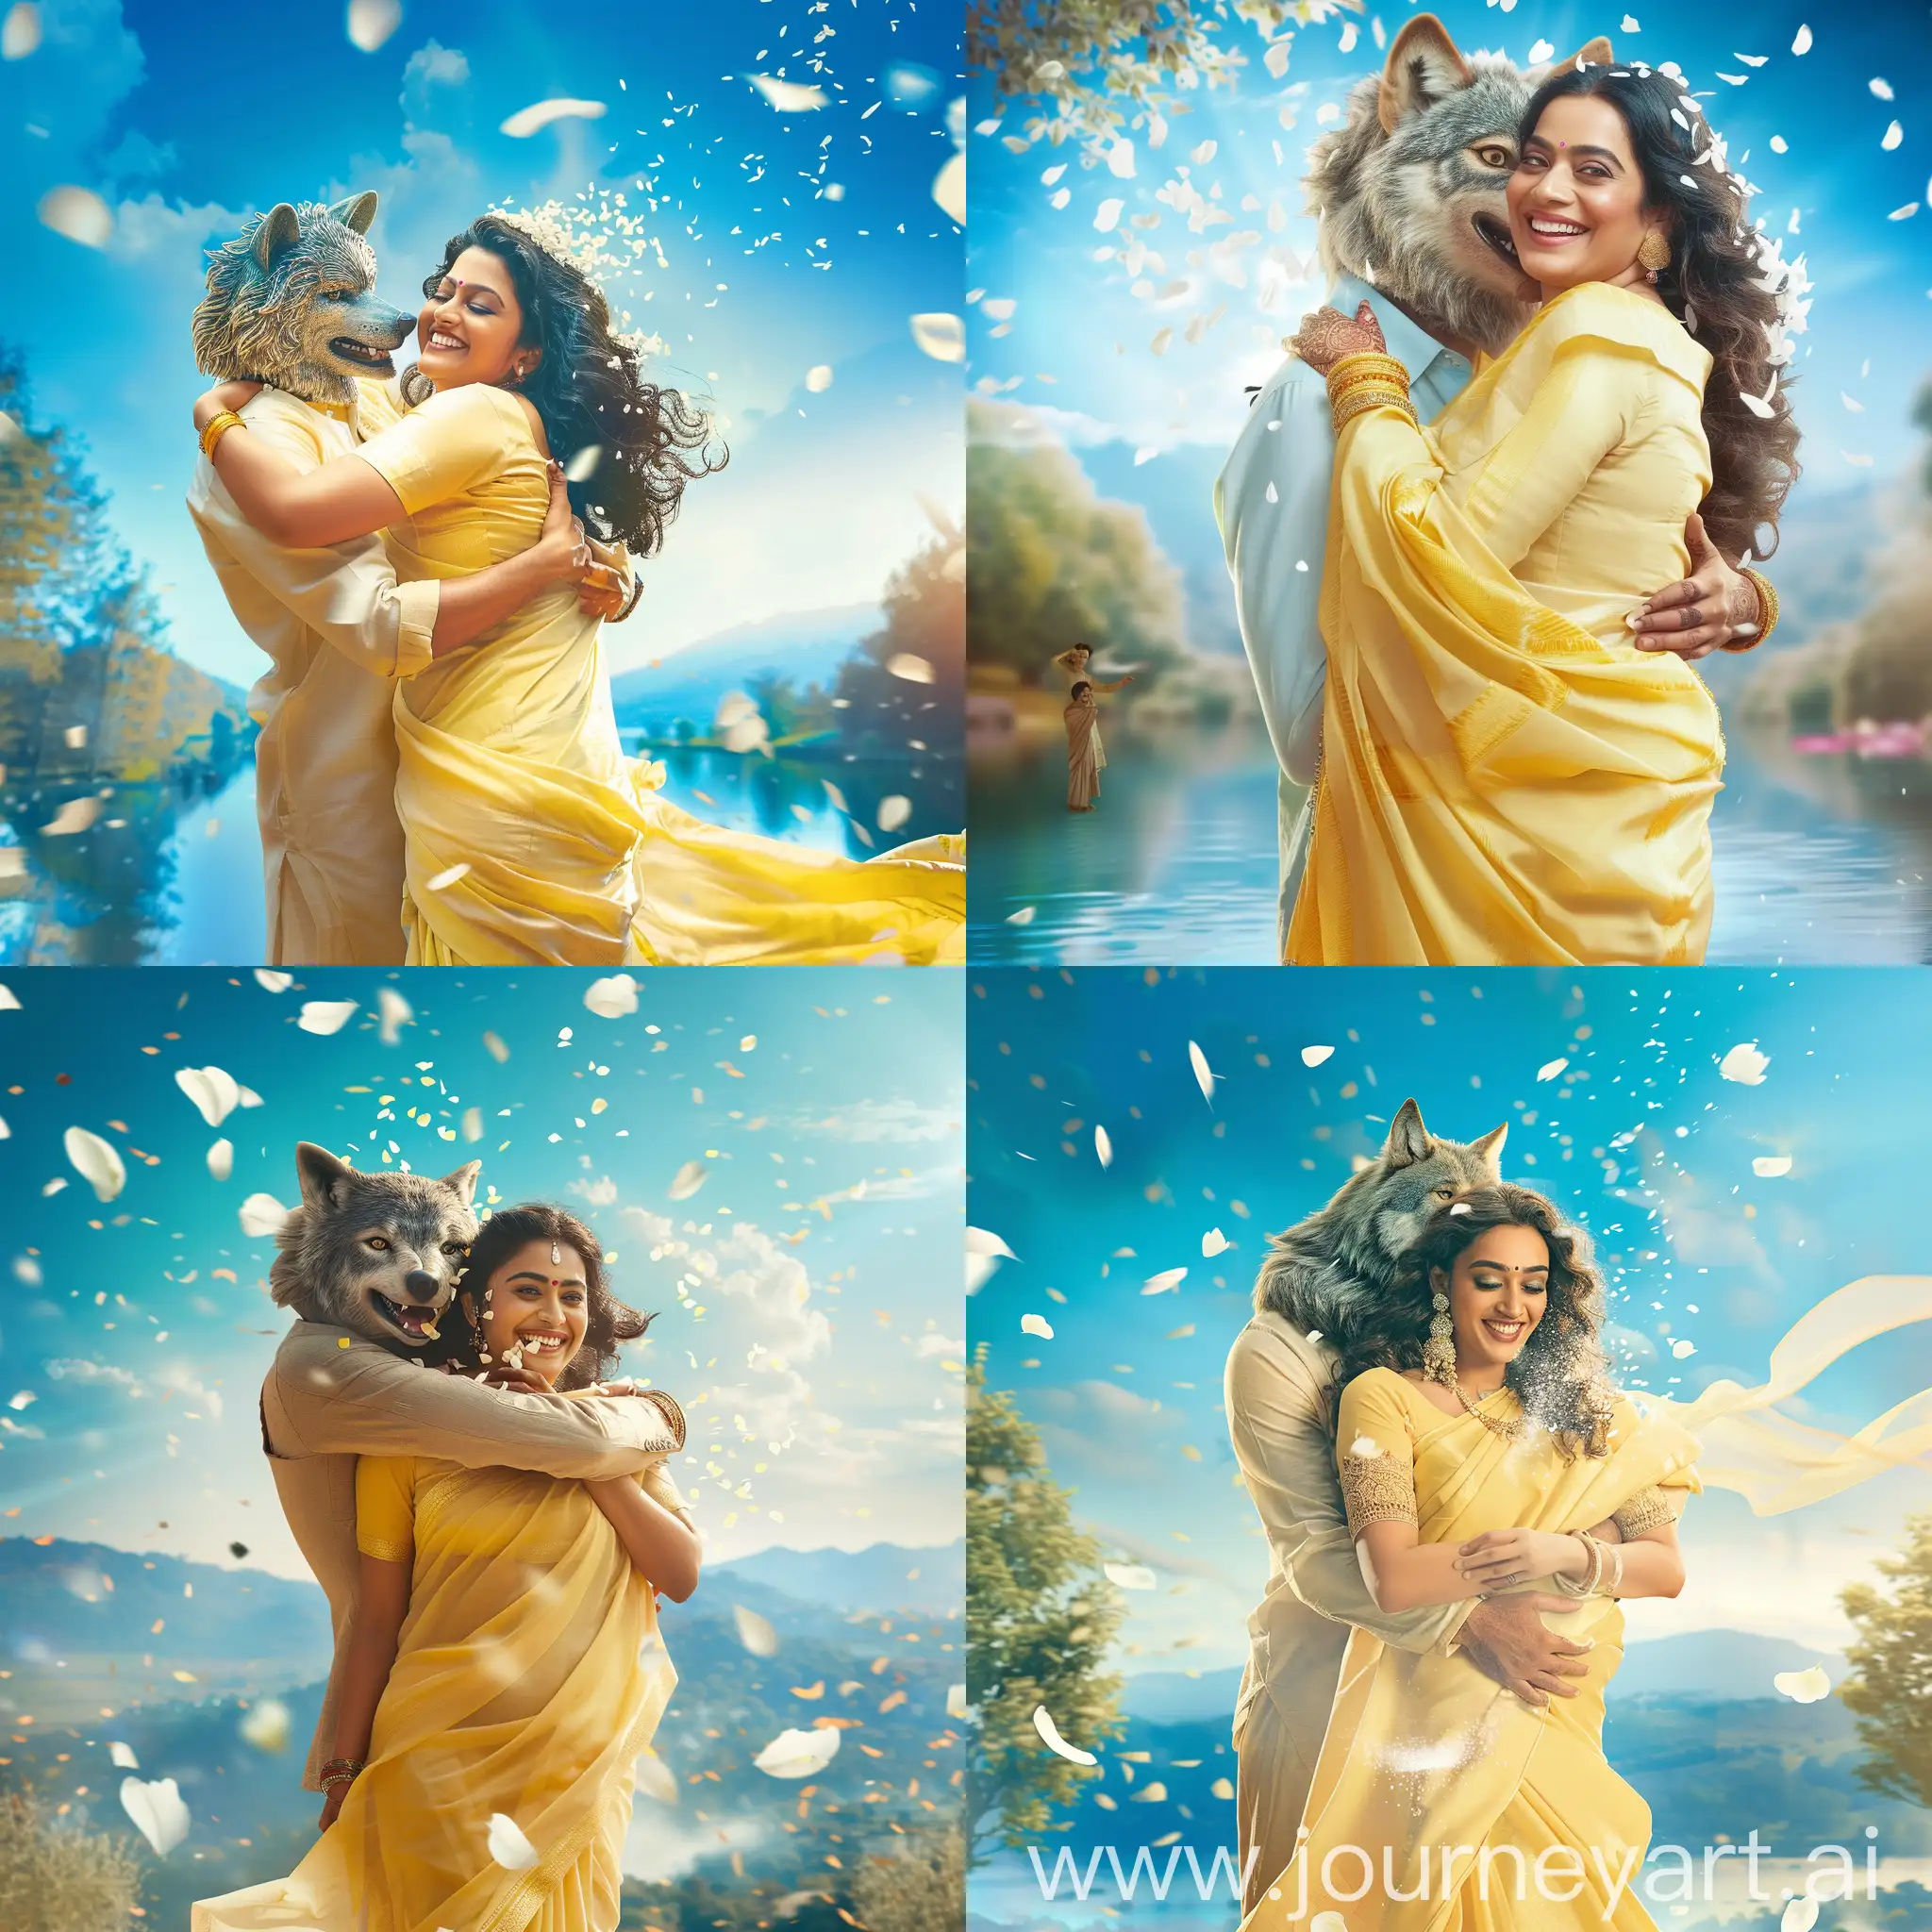 Create a stunning visual of most beautiful, elegant, curvy Kavya Madhavan, wearing a yellow creamy saree, is hugged from behind by a wolf headed man with love and vigor, there is intricately detailed picterisque landscape in the background, signaling a spark of love and excitement, the sky is blue and vibrant, she is showered with white petals from heaven, she is full of energy for having more of this treat, she is happy and tranquil, a attractive, beautiful, curvy, half body shot, perfect composition, golden ratio in the composition, vibrant soothing, cinematic lighting